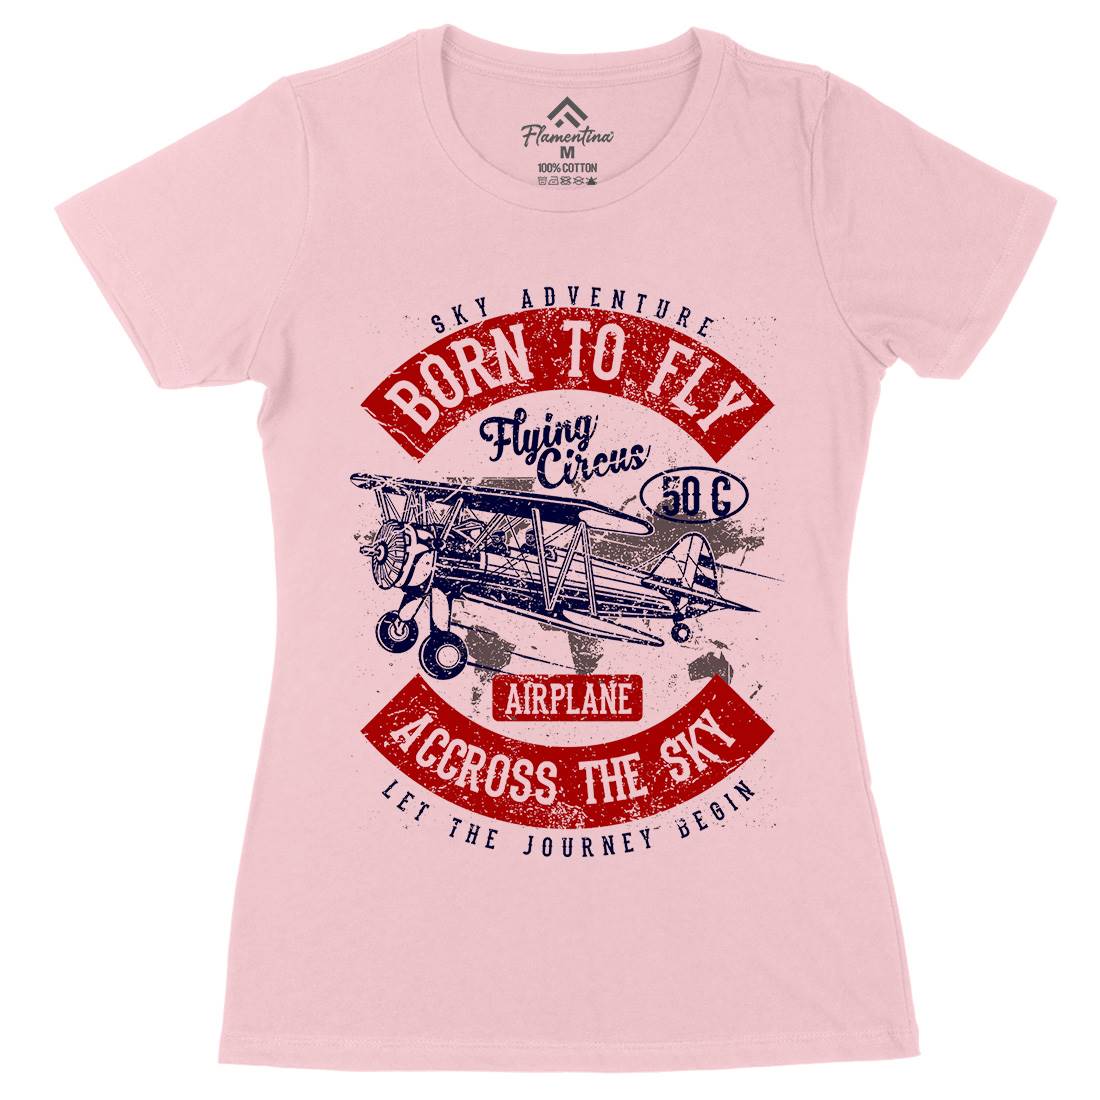 Born To Fly Womens Organic Crew Neck T-Shirt Vehicles A019